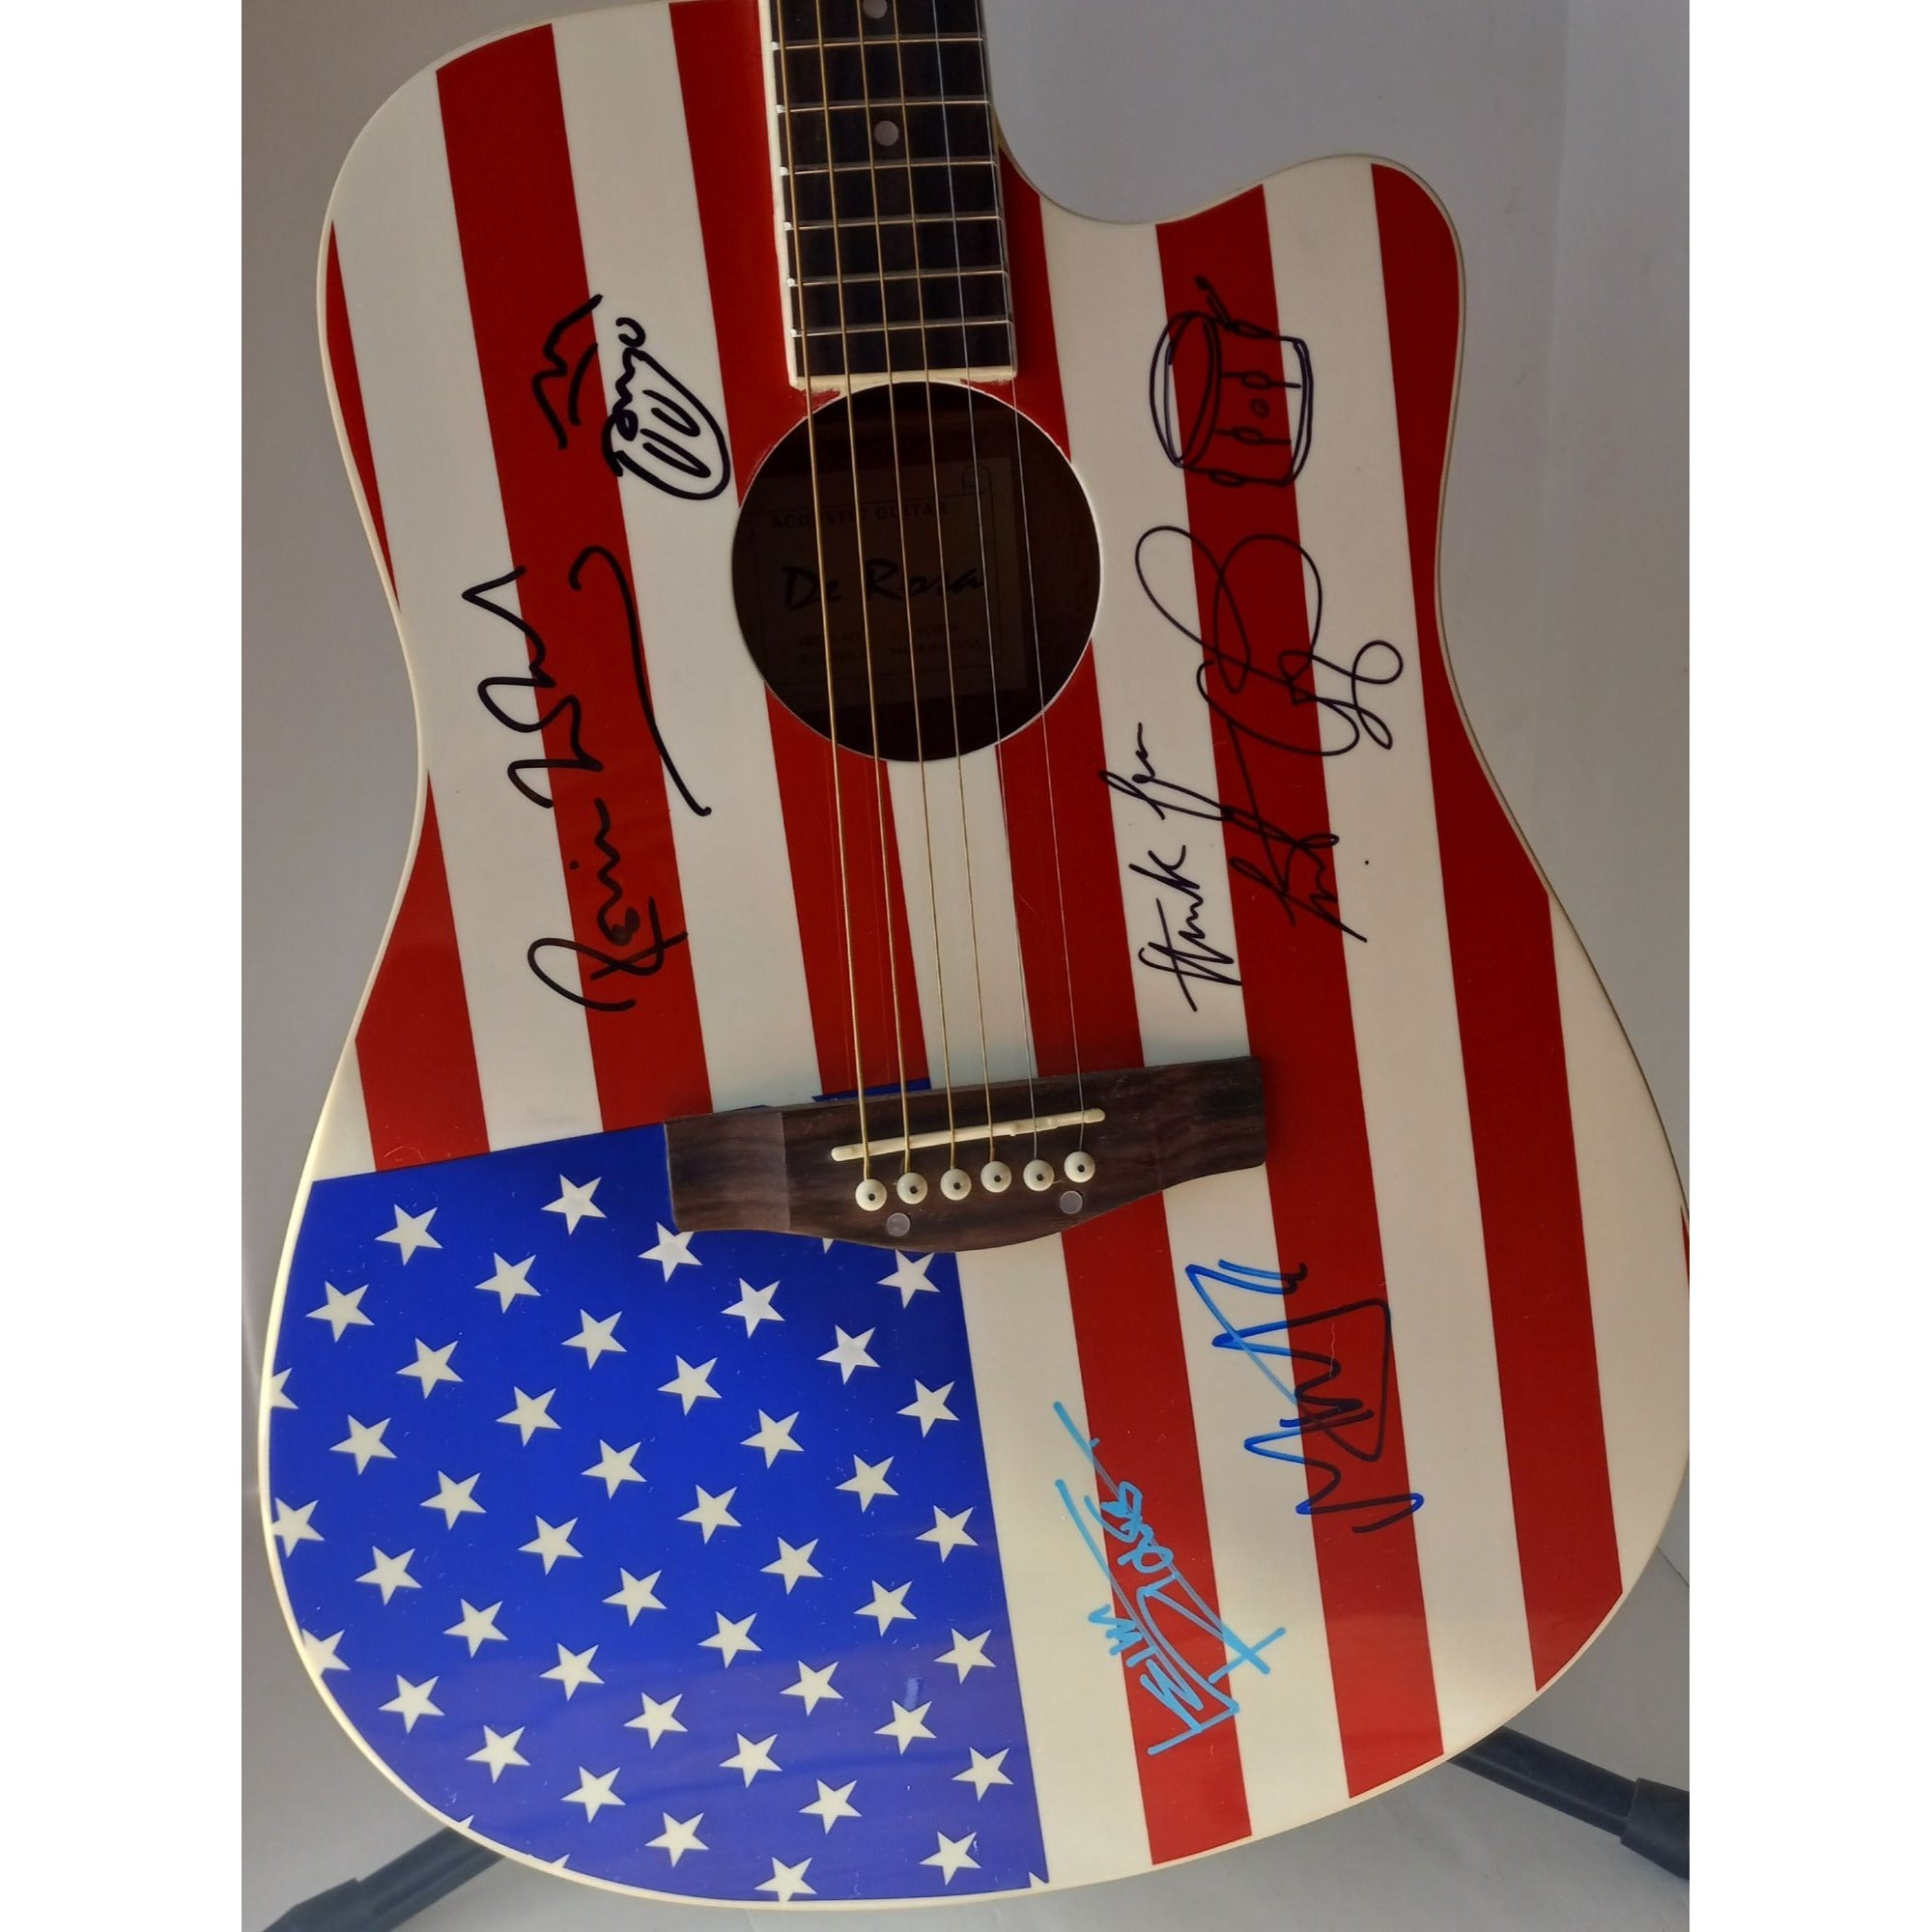 Keith Richards Mick Jagger Charlie Watts Ronnie Wood full size guitar signed